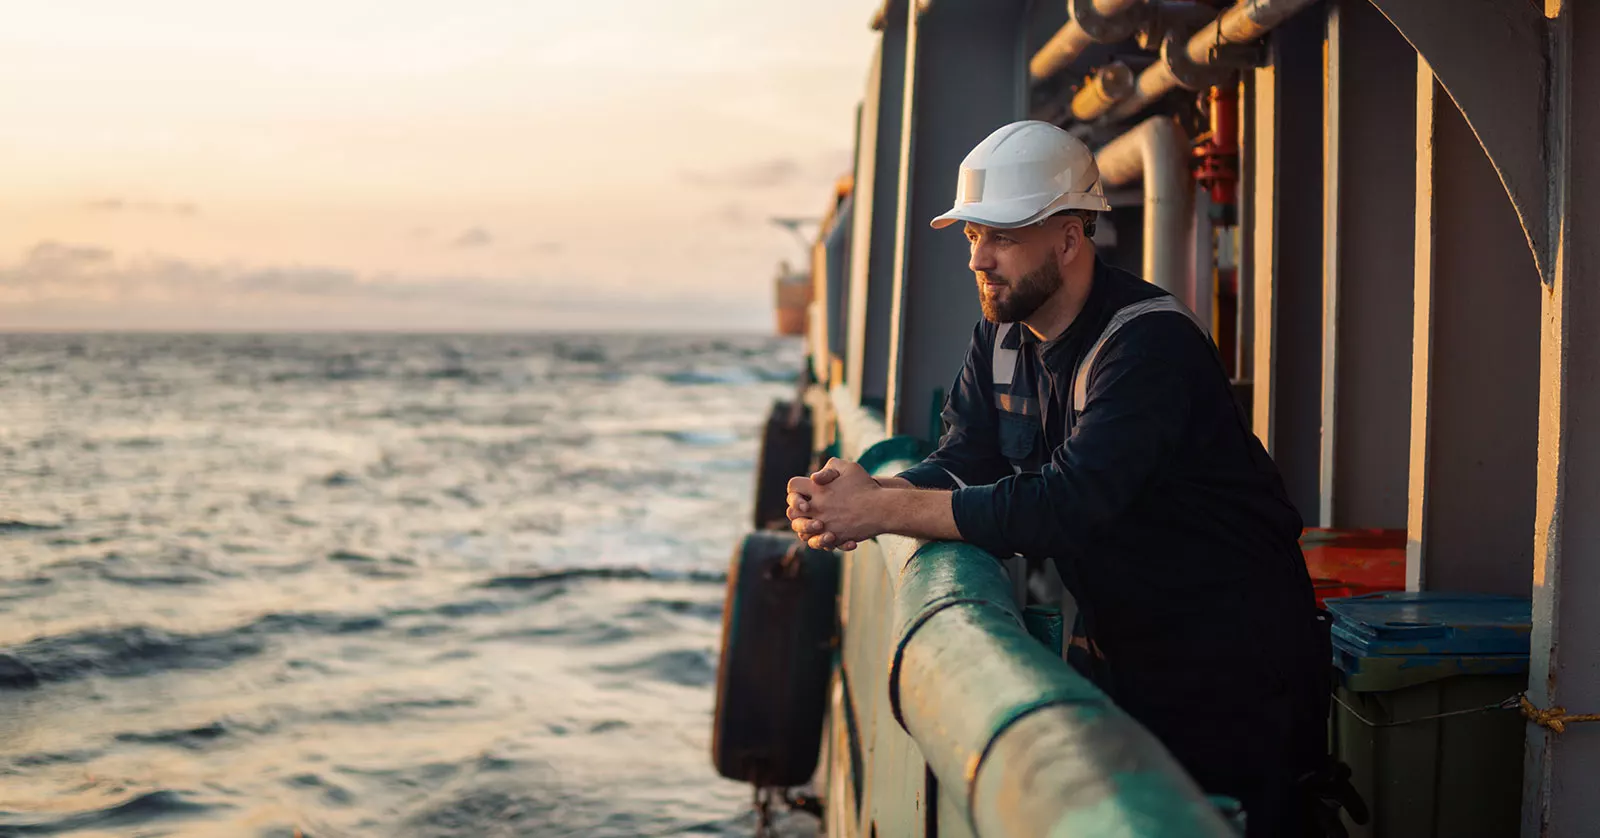 The Jones Act is a federal law that protects the rights of maritime workers who are injured or killed on the job. It has been amended and revised several times since 1920.